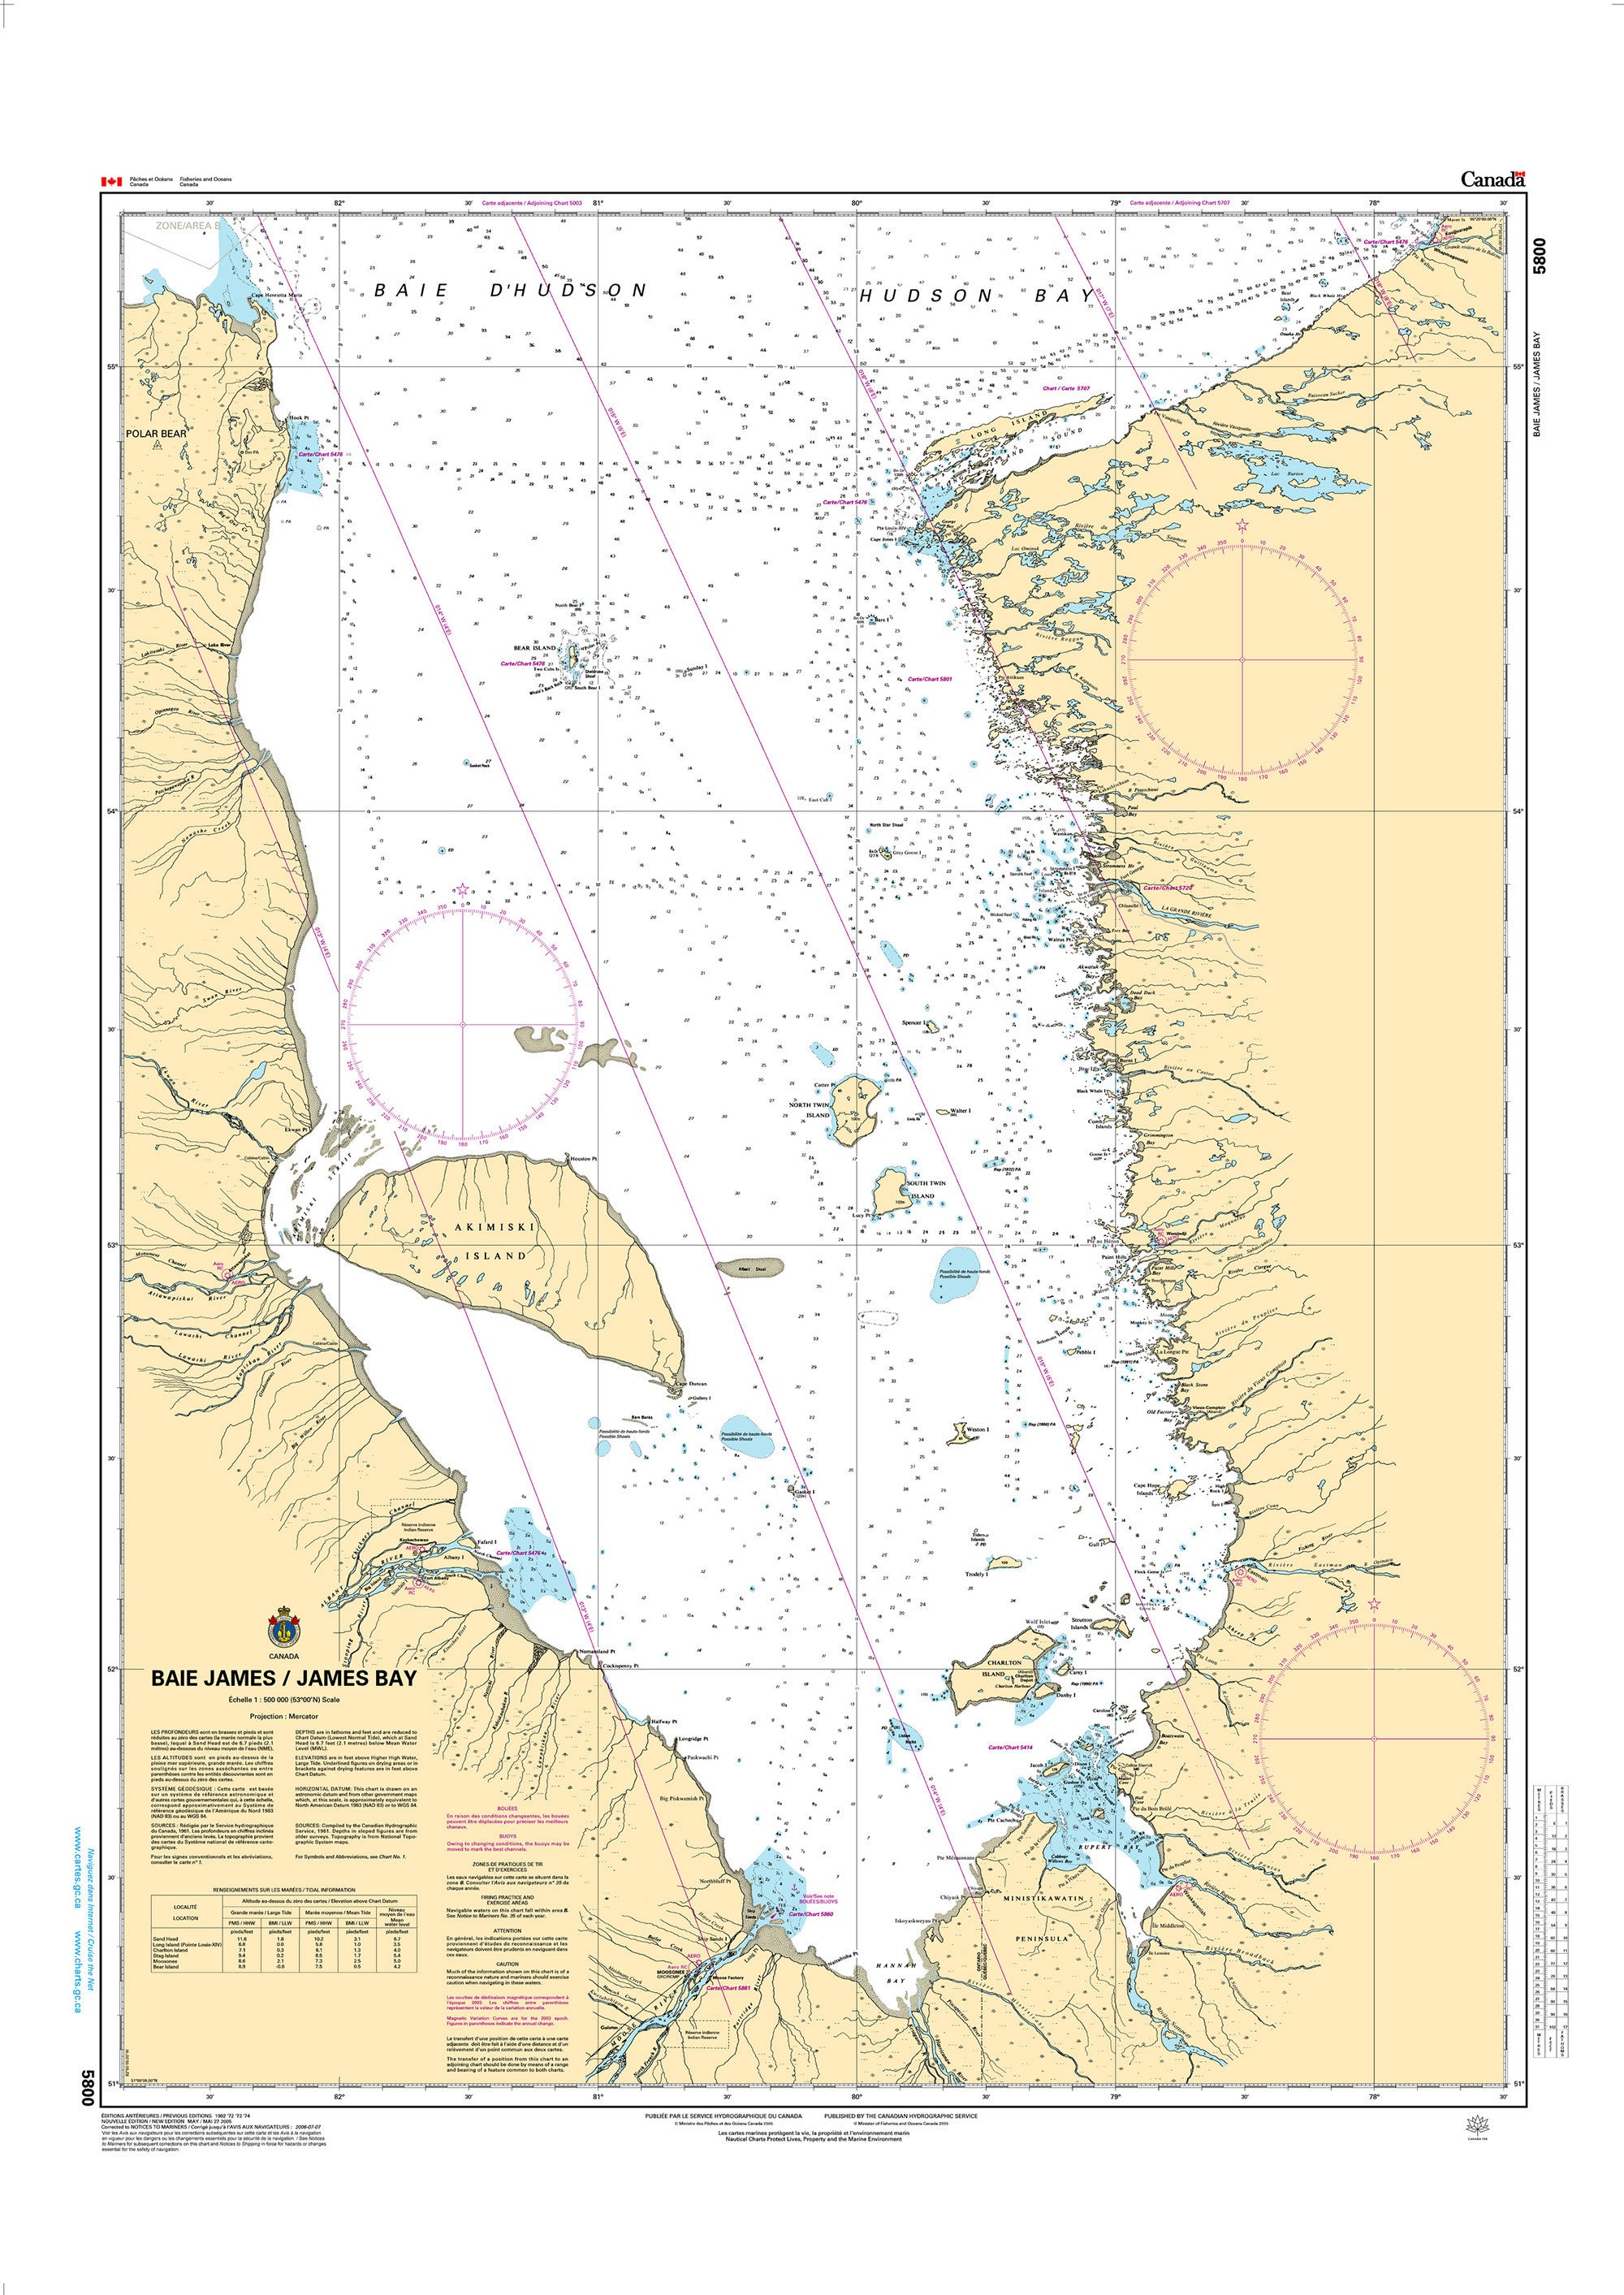 Canadian Hydrographic Service Nautical Chart CHS5800: Baie James/James Bay